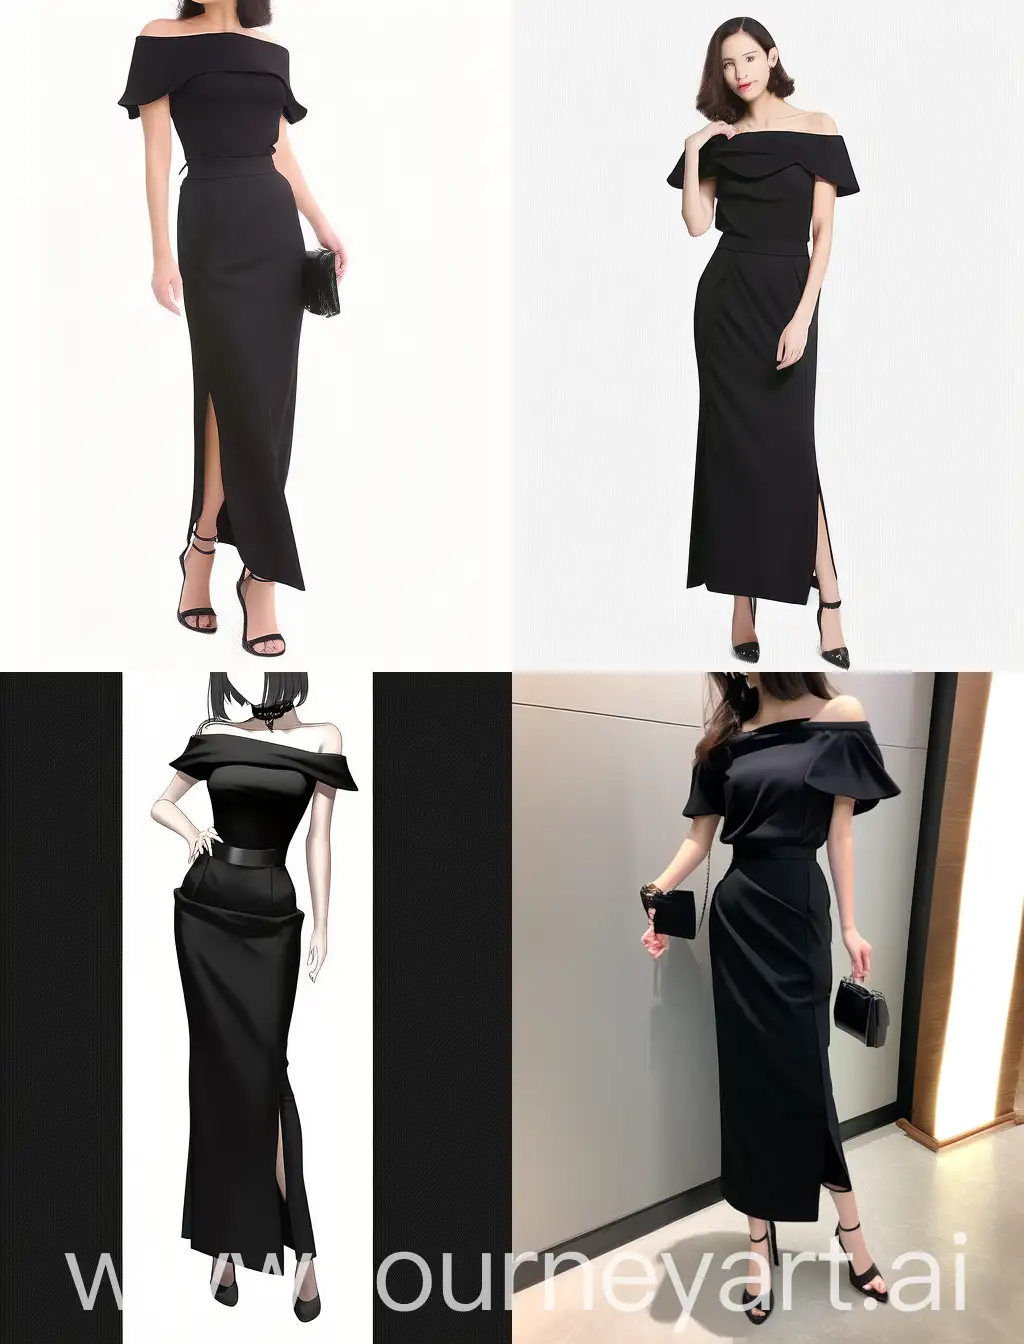 Elegant-Black-Maxi-Dress-with-OffShoulder-Sleeves-and-ThighHigh-Slit